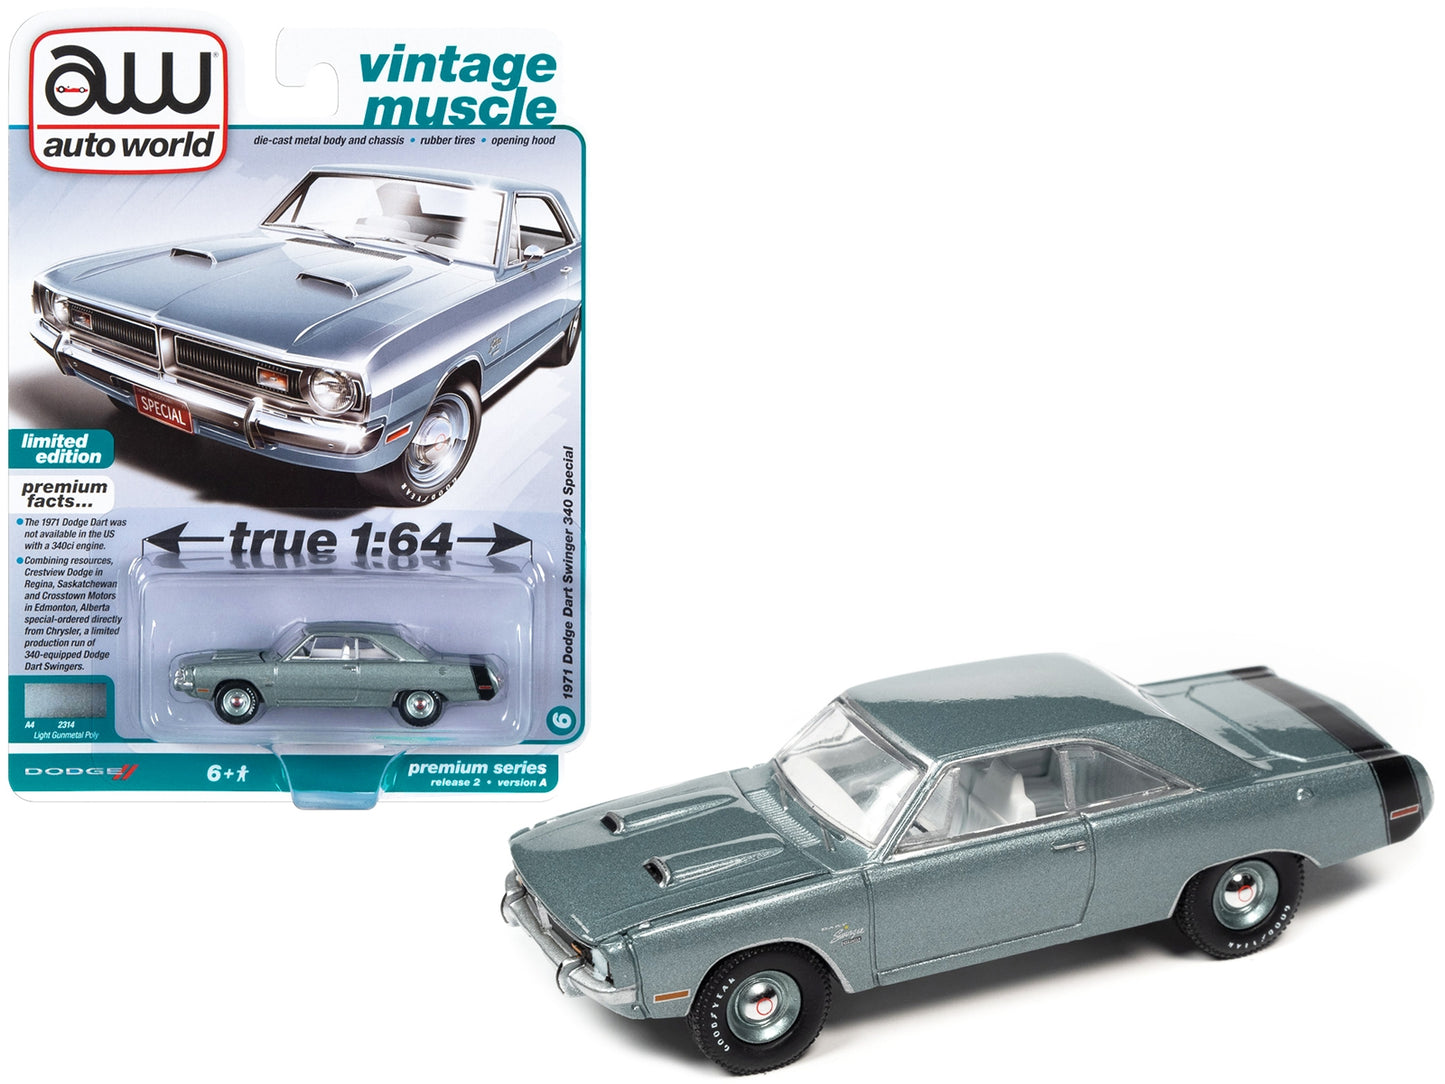 1971 Dodge Dart Swinger 340 Special Light Gunmetal Gray Metallic with Black Tail Stripe "Vintage Muscle" Limited Edition 1/64 Diecast Model Car by Auto World